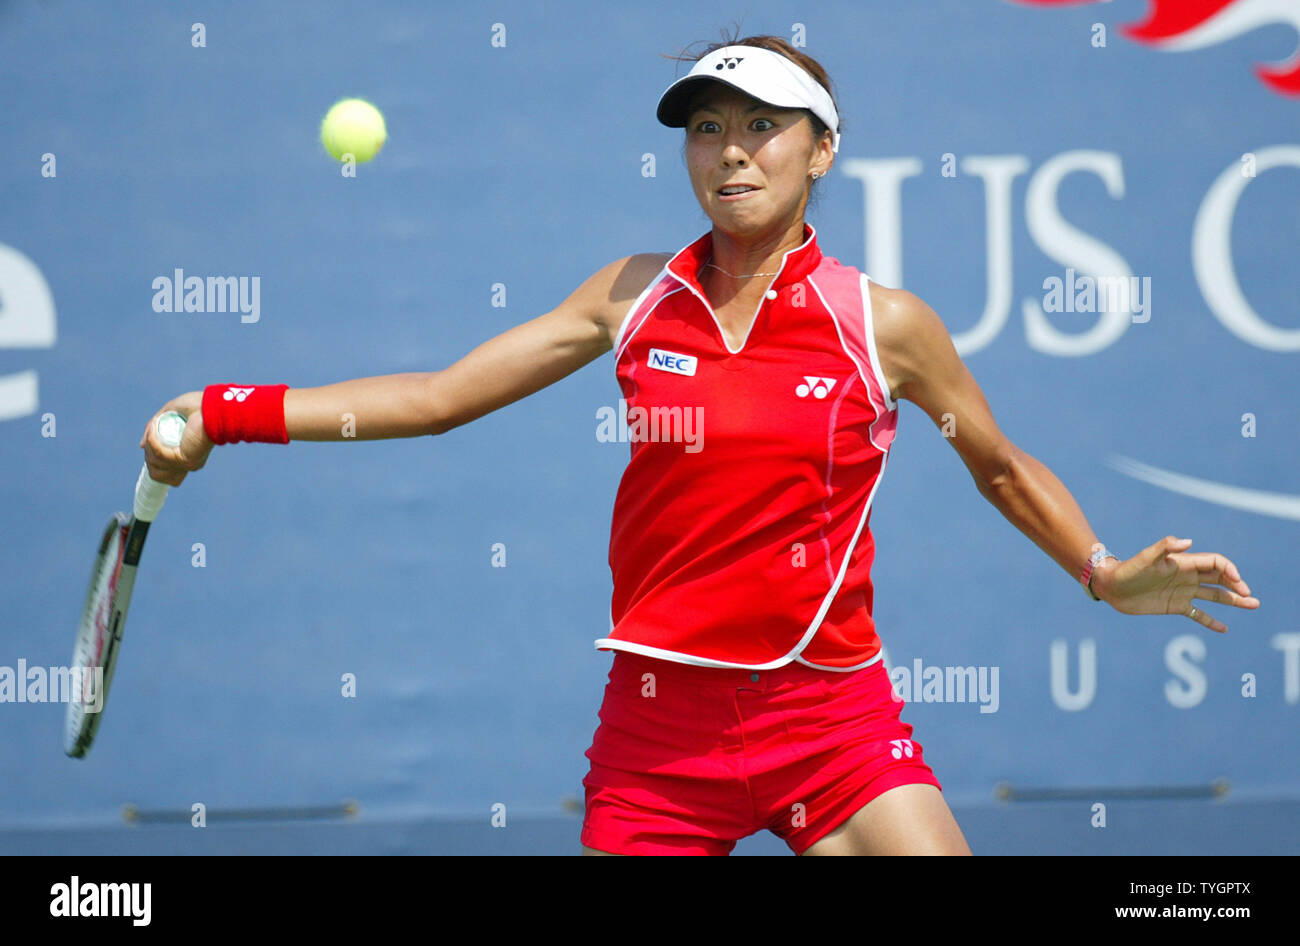 Shinobu Asagoe (JPN) hits a forehand in her straight sets victory over Paola Suarez (ARG) during day 6 action at the US Open in Flushing, New York on September 4, 2004.    (UPI Photo/John Angelillo) Stock Photo